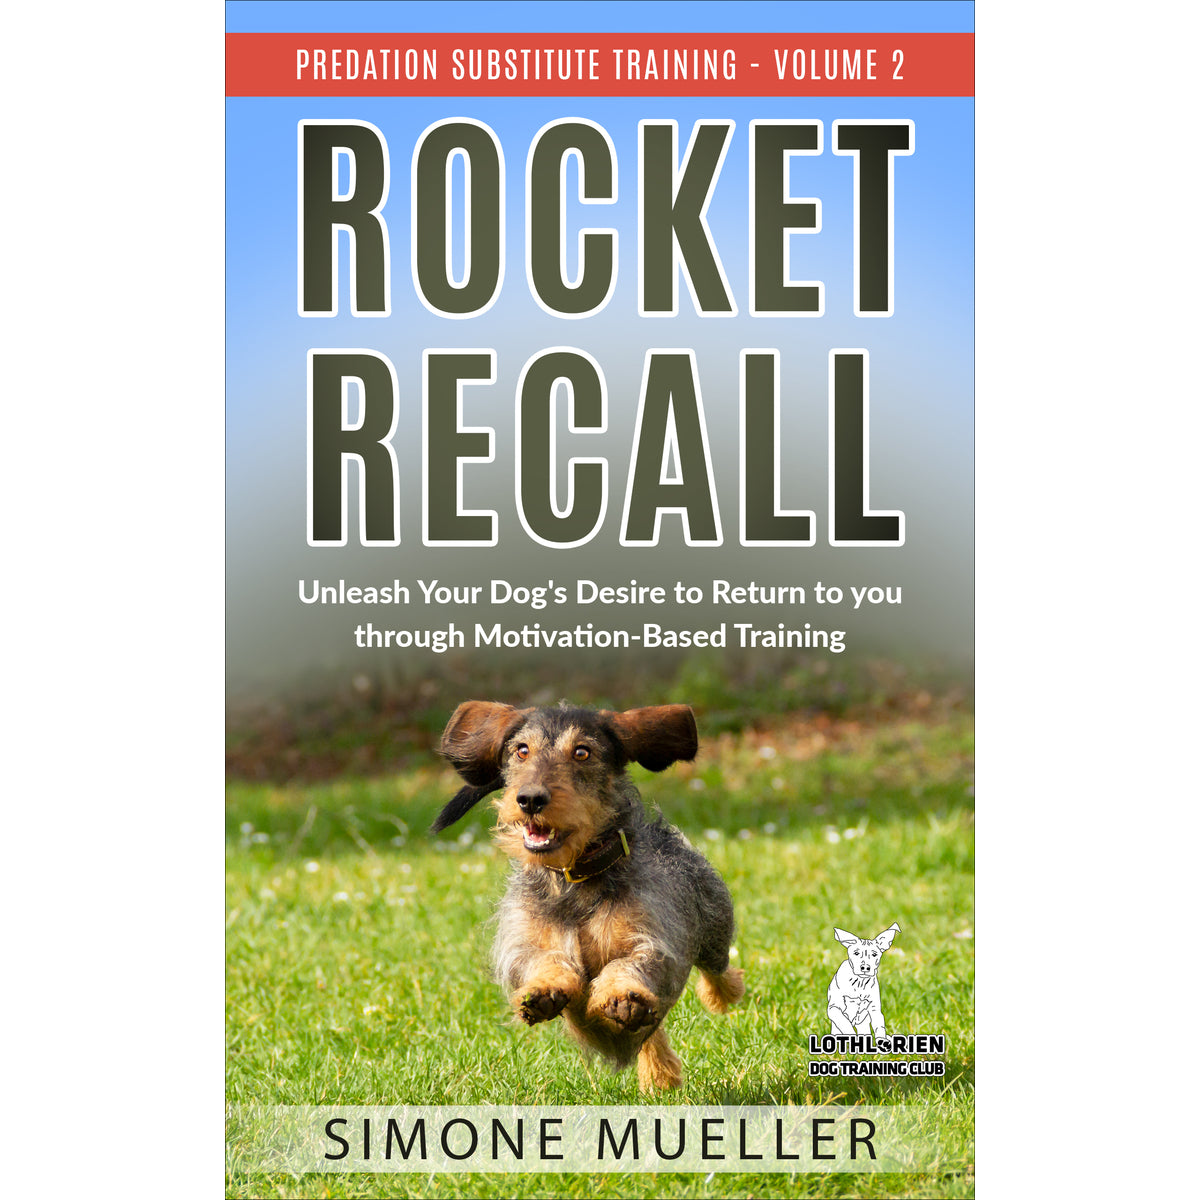 Rocket Recall: Unleash Your Dog's Desire to Return to You through Motivation-Based Training (Predation Substitute Training) Paperback